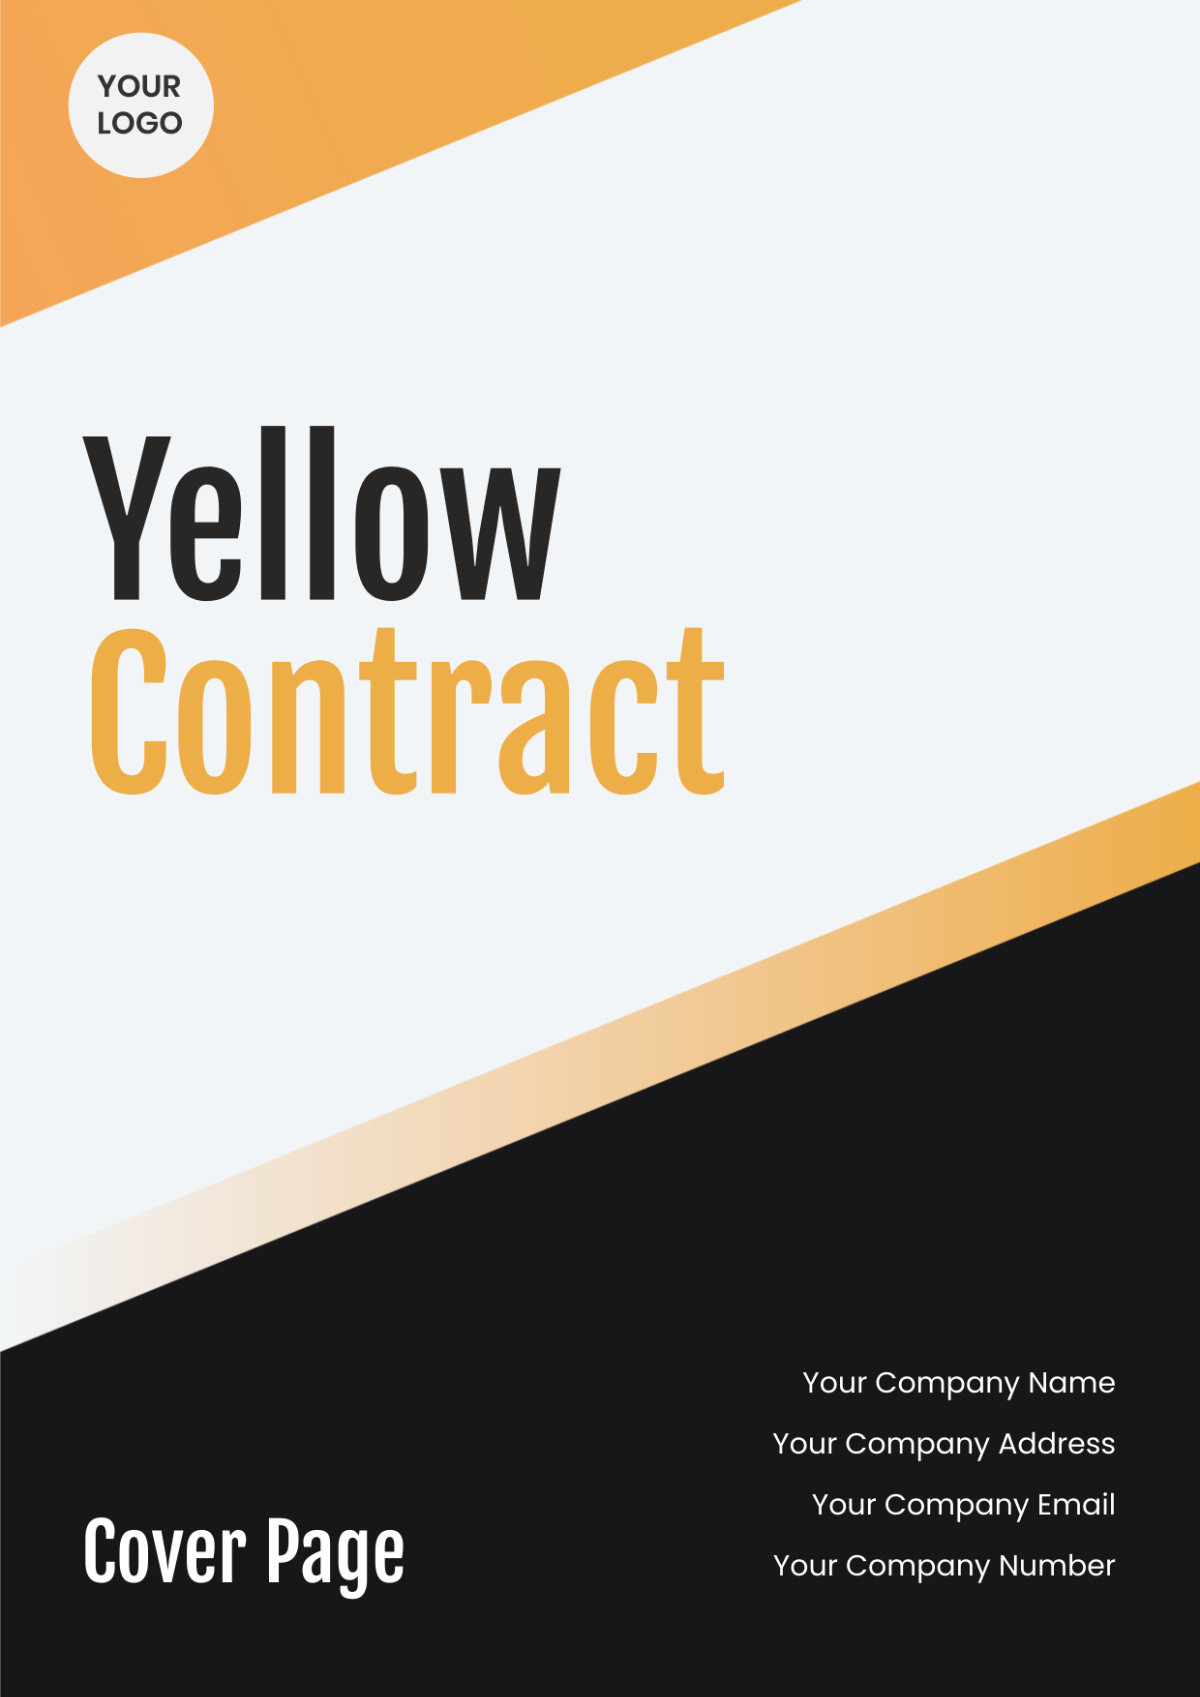 Yellow Contract Cover Page